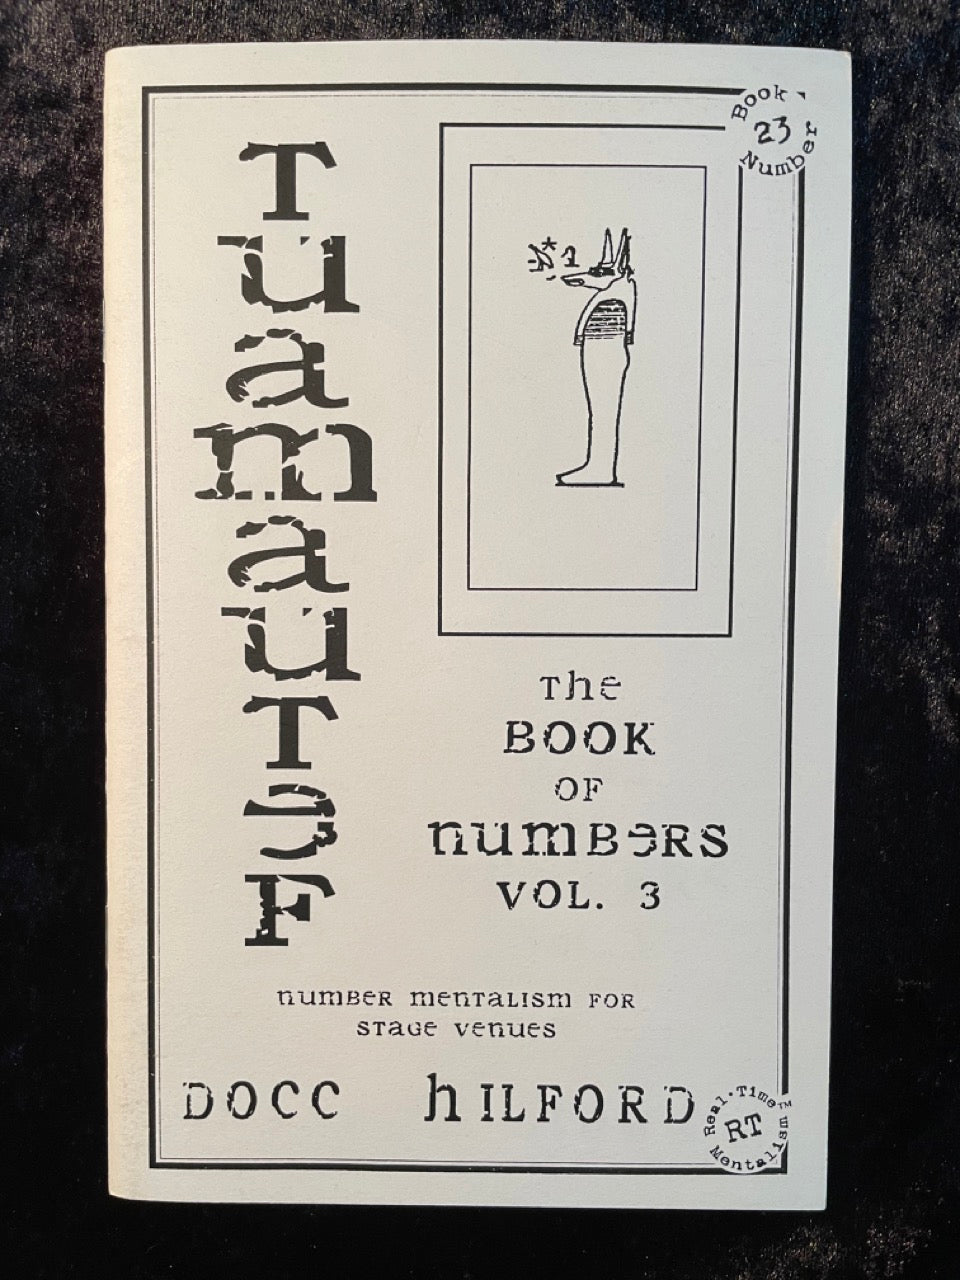 TUAMATEF (The Book of Numbers Vol.3) - Docc Hilford